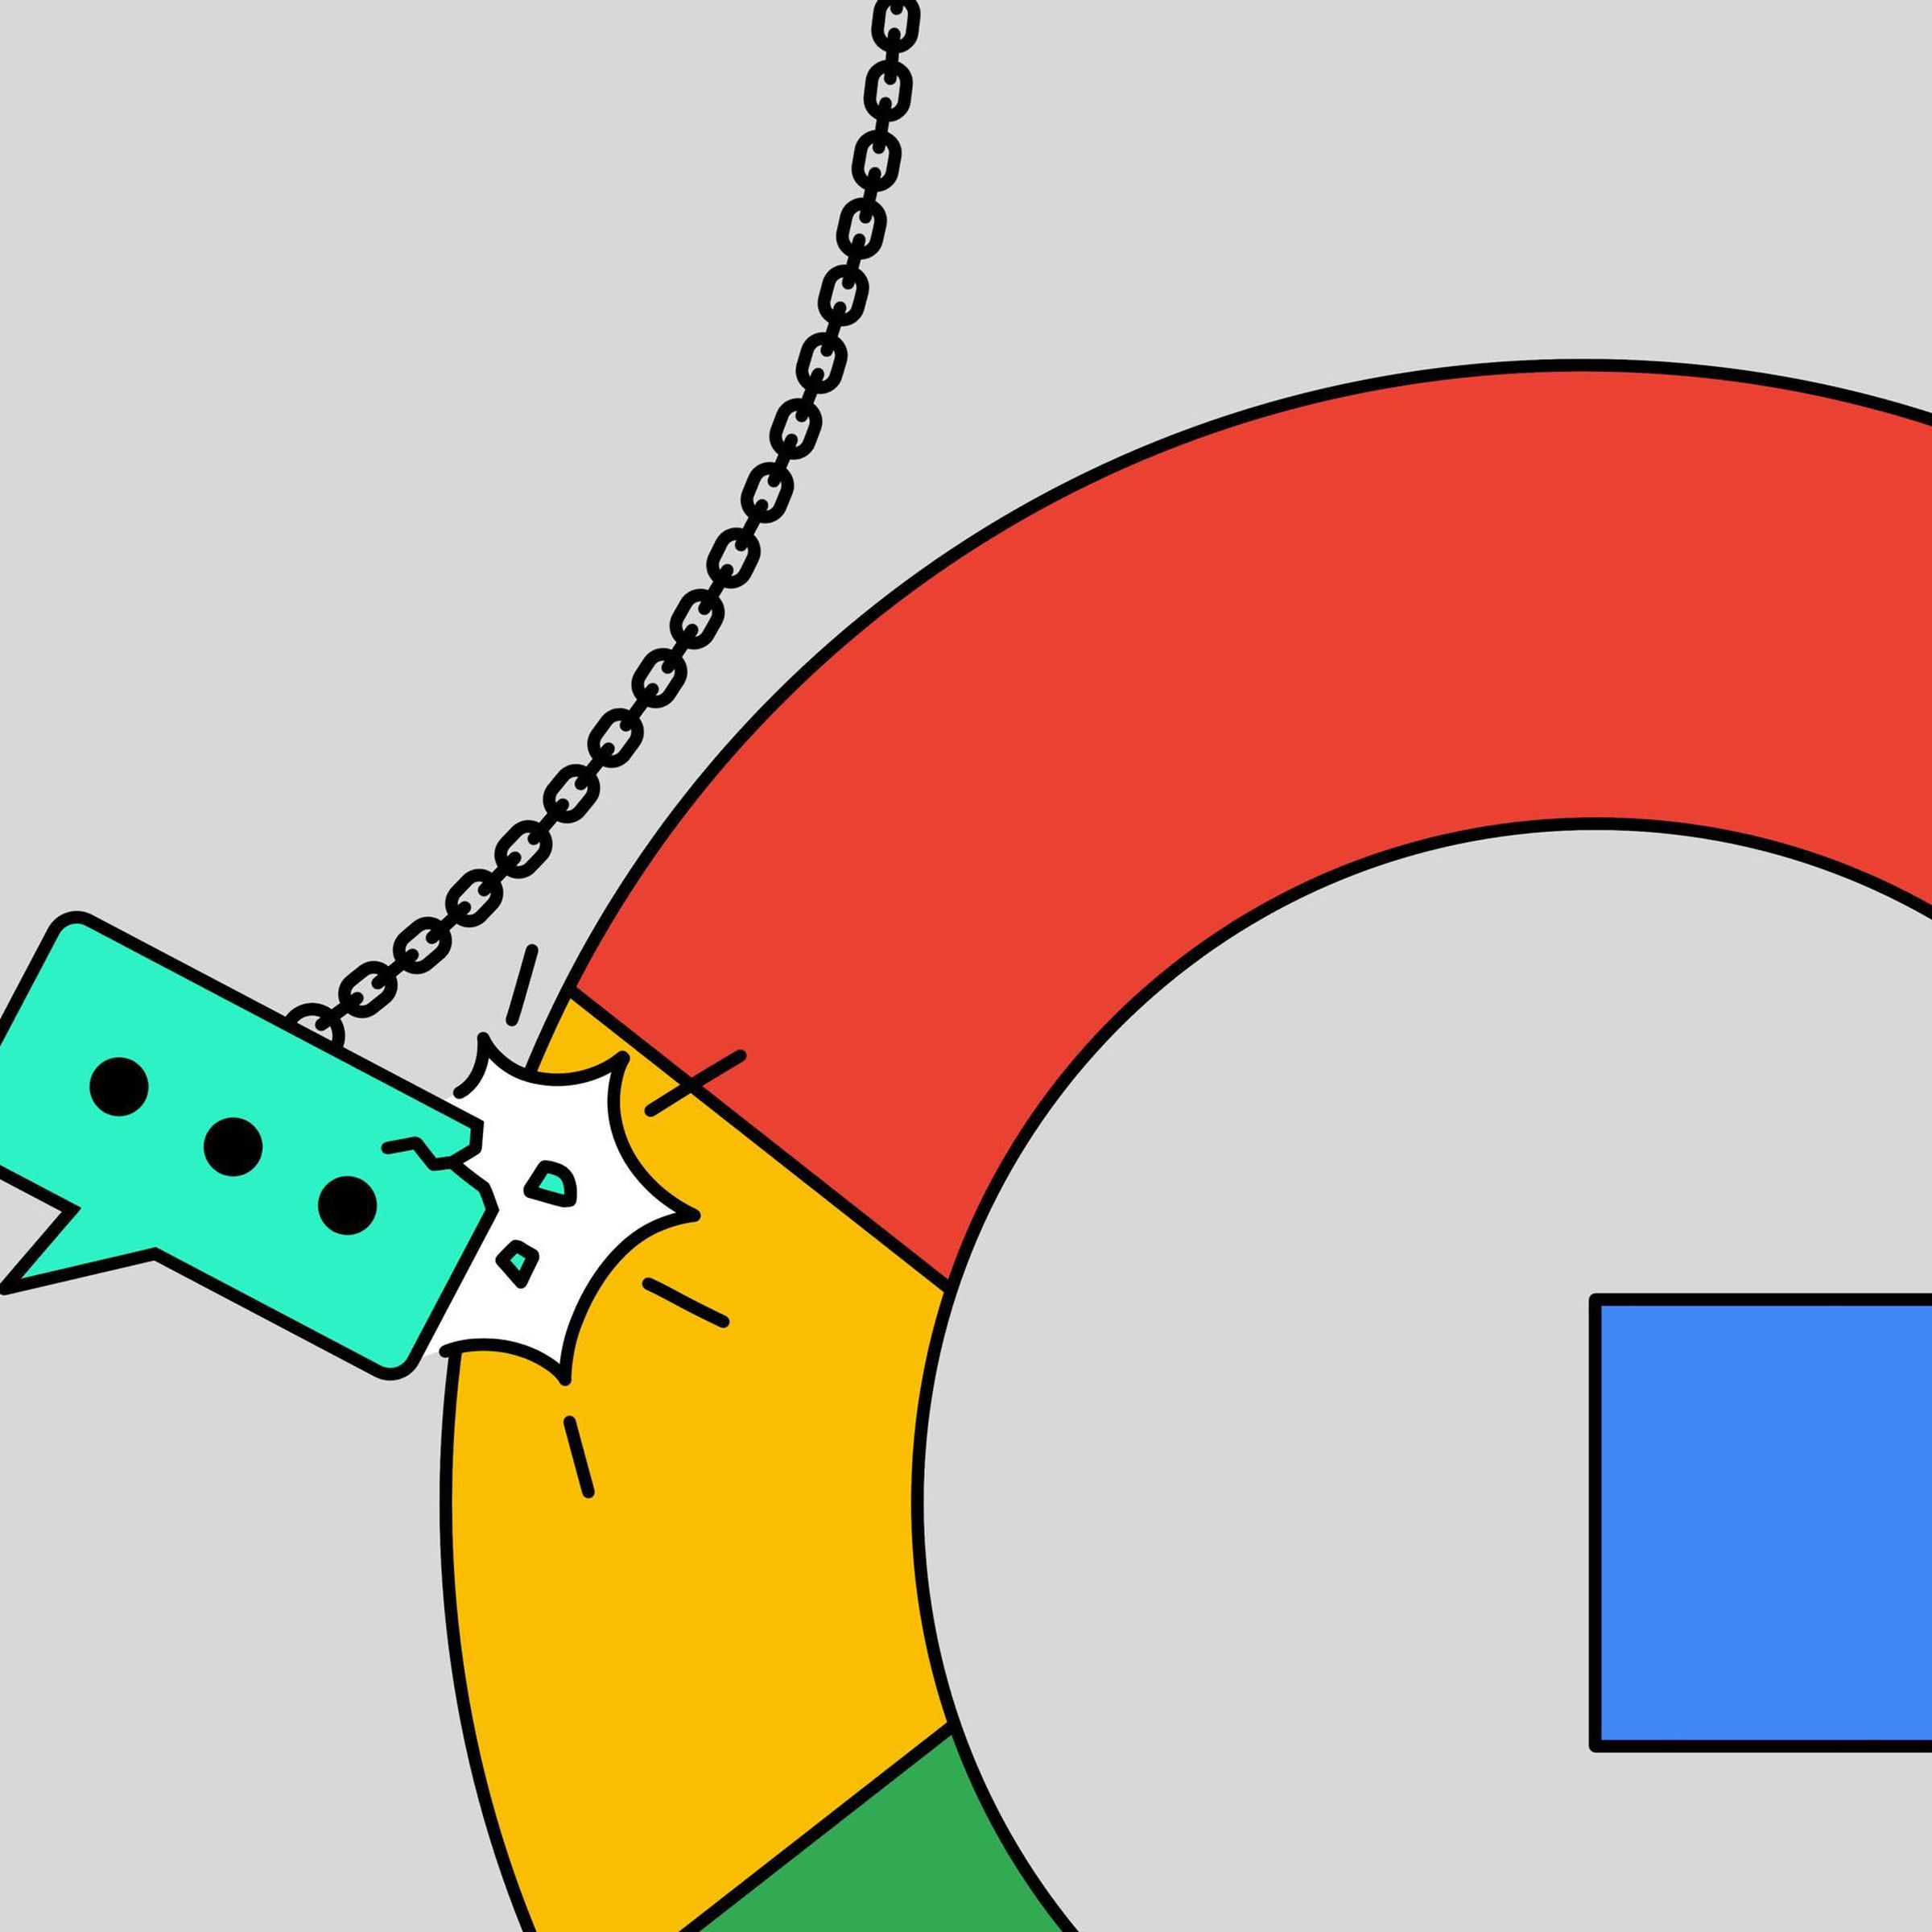 An illustration of a chatbot swinging into a Google logo.